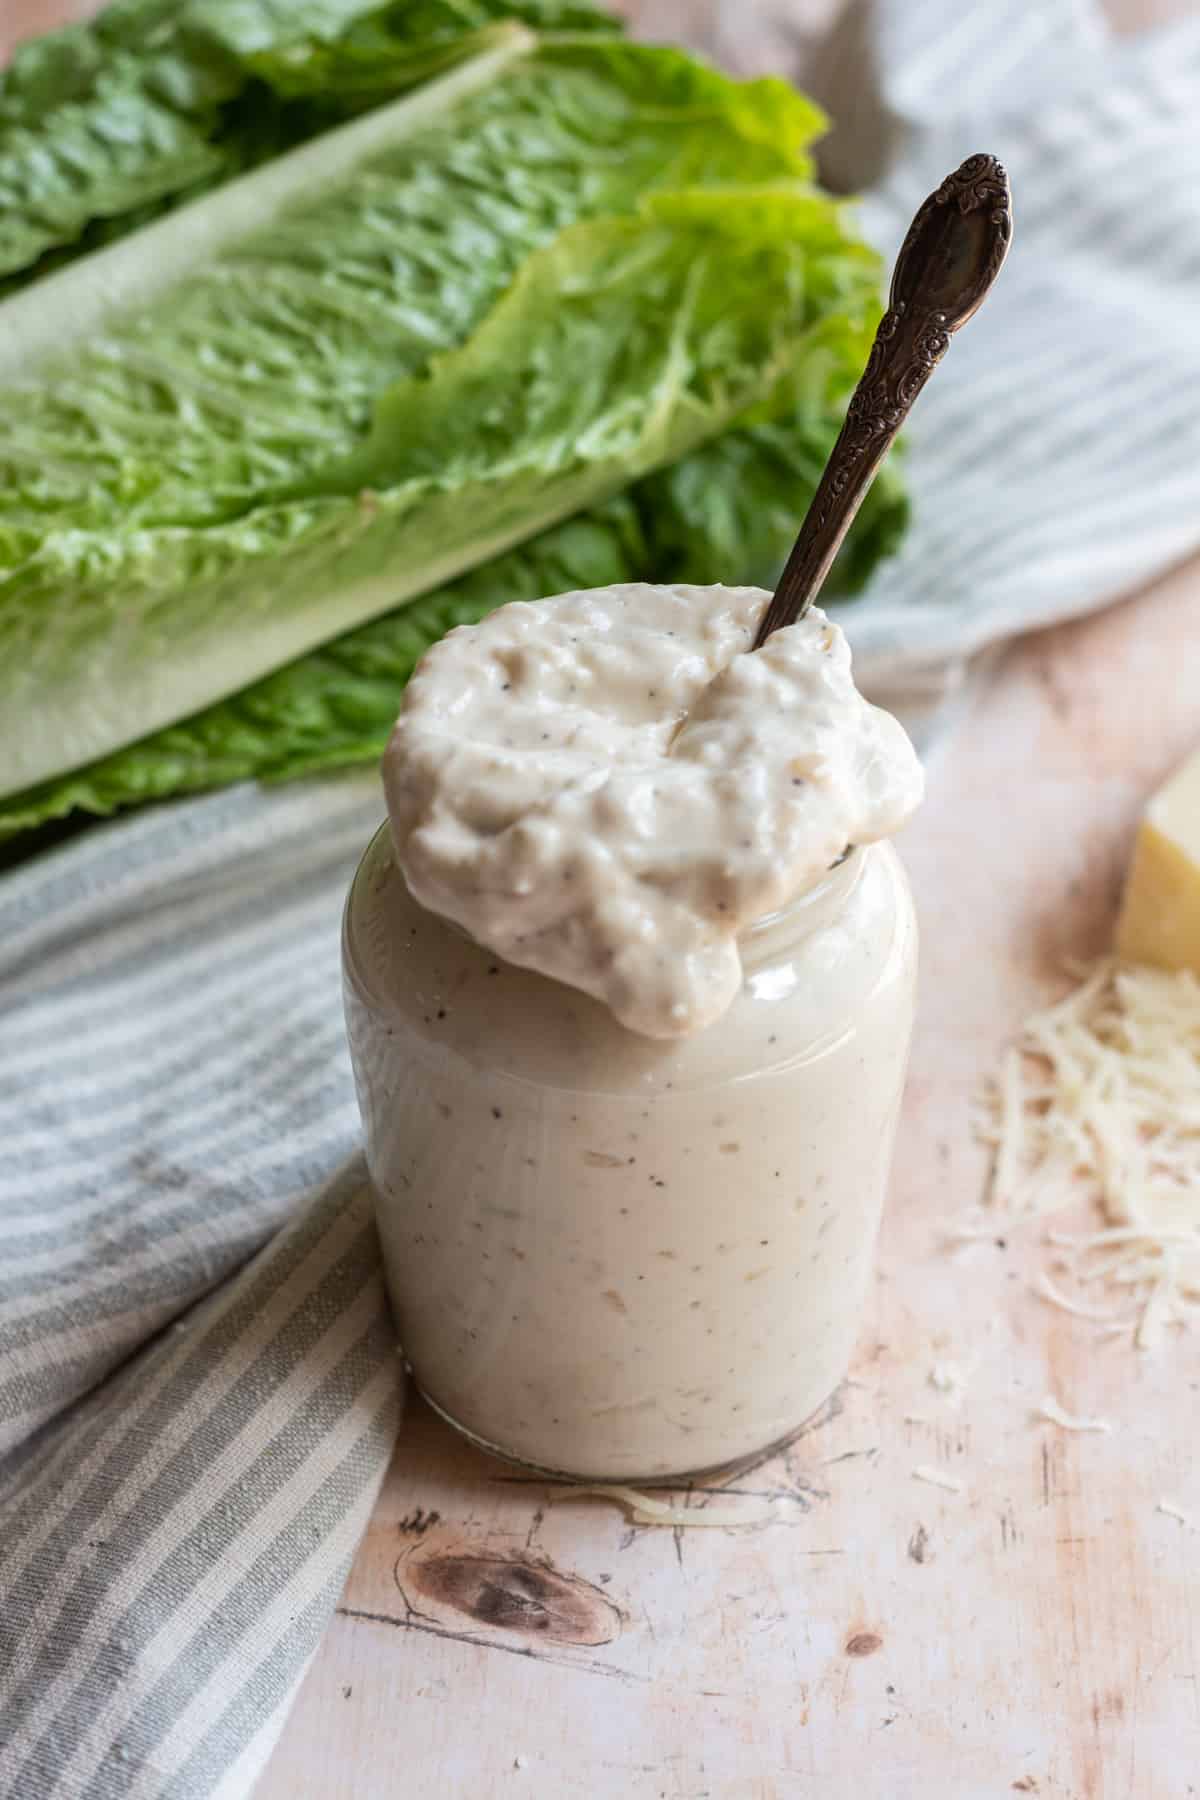 Small glass jar of Caesar dressing (no anchovies) with a spoon, lettuce leaves in the background, a striped towel in the background, and shredded parmesan cheese around the jar.